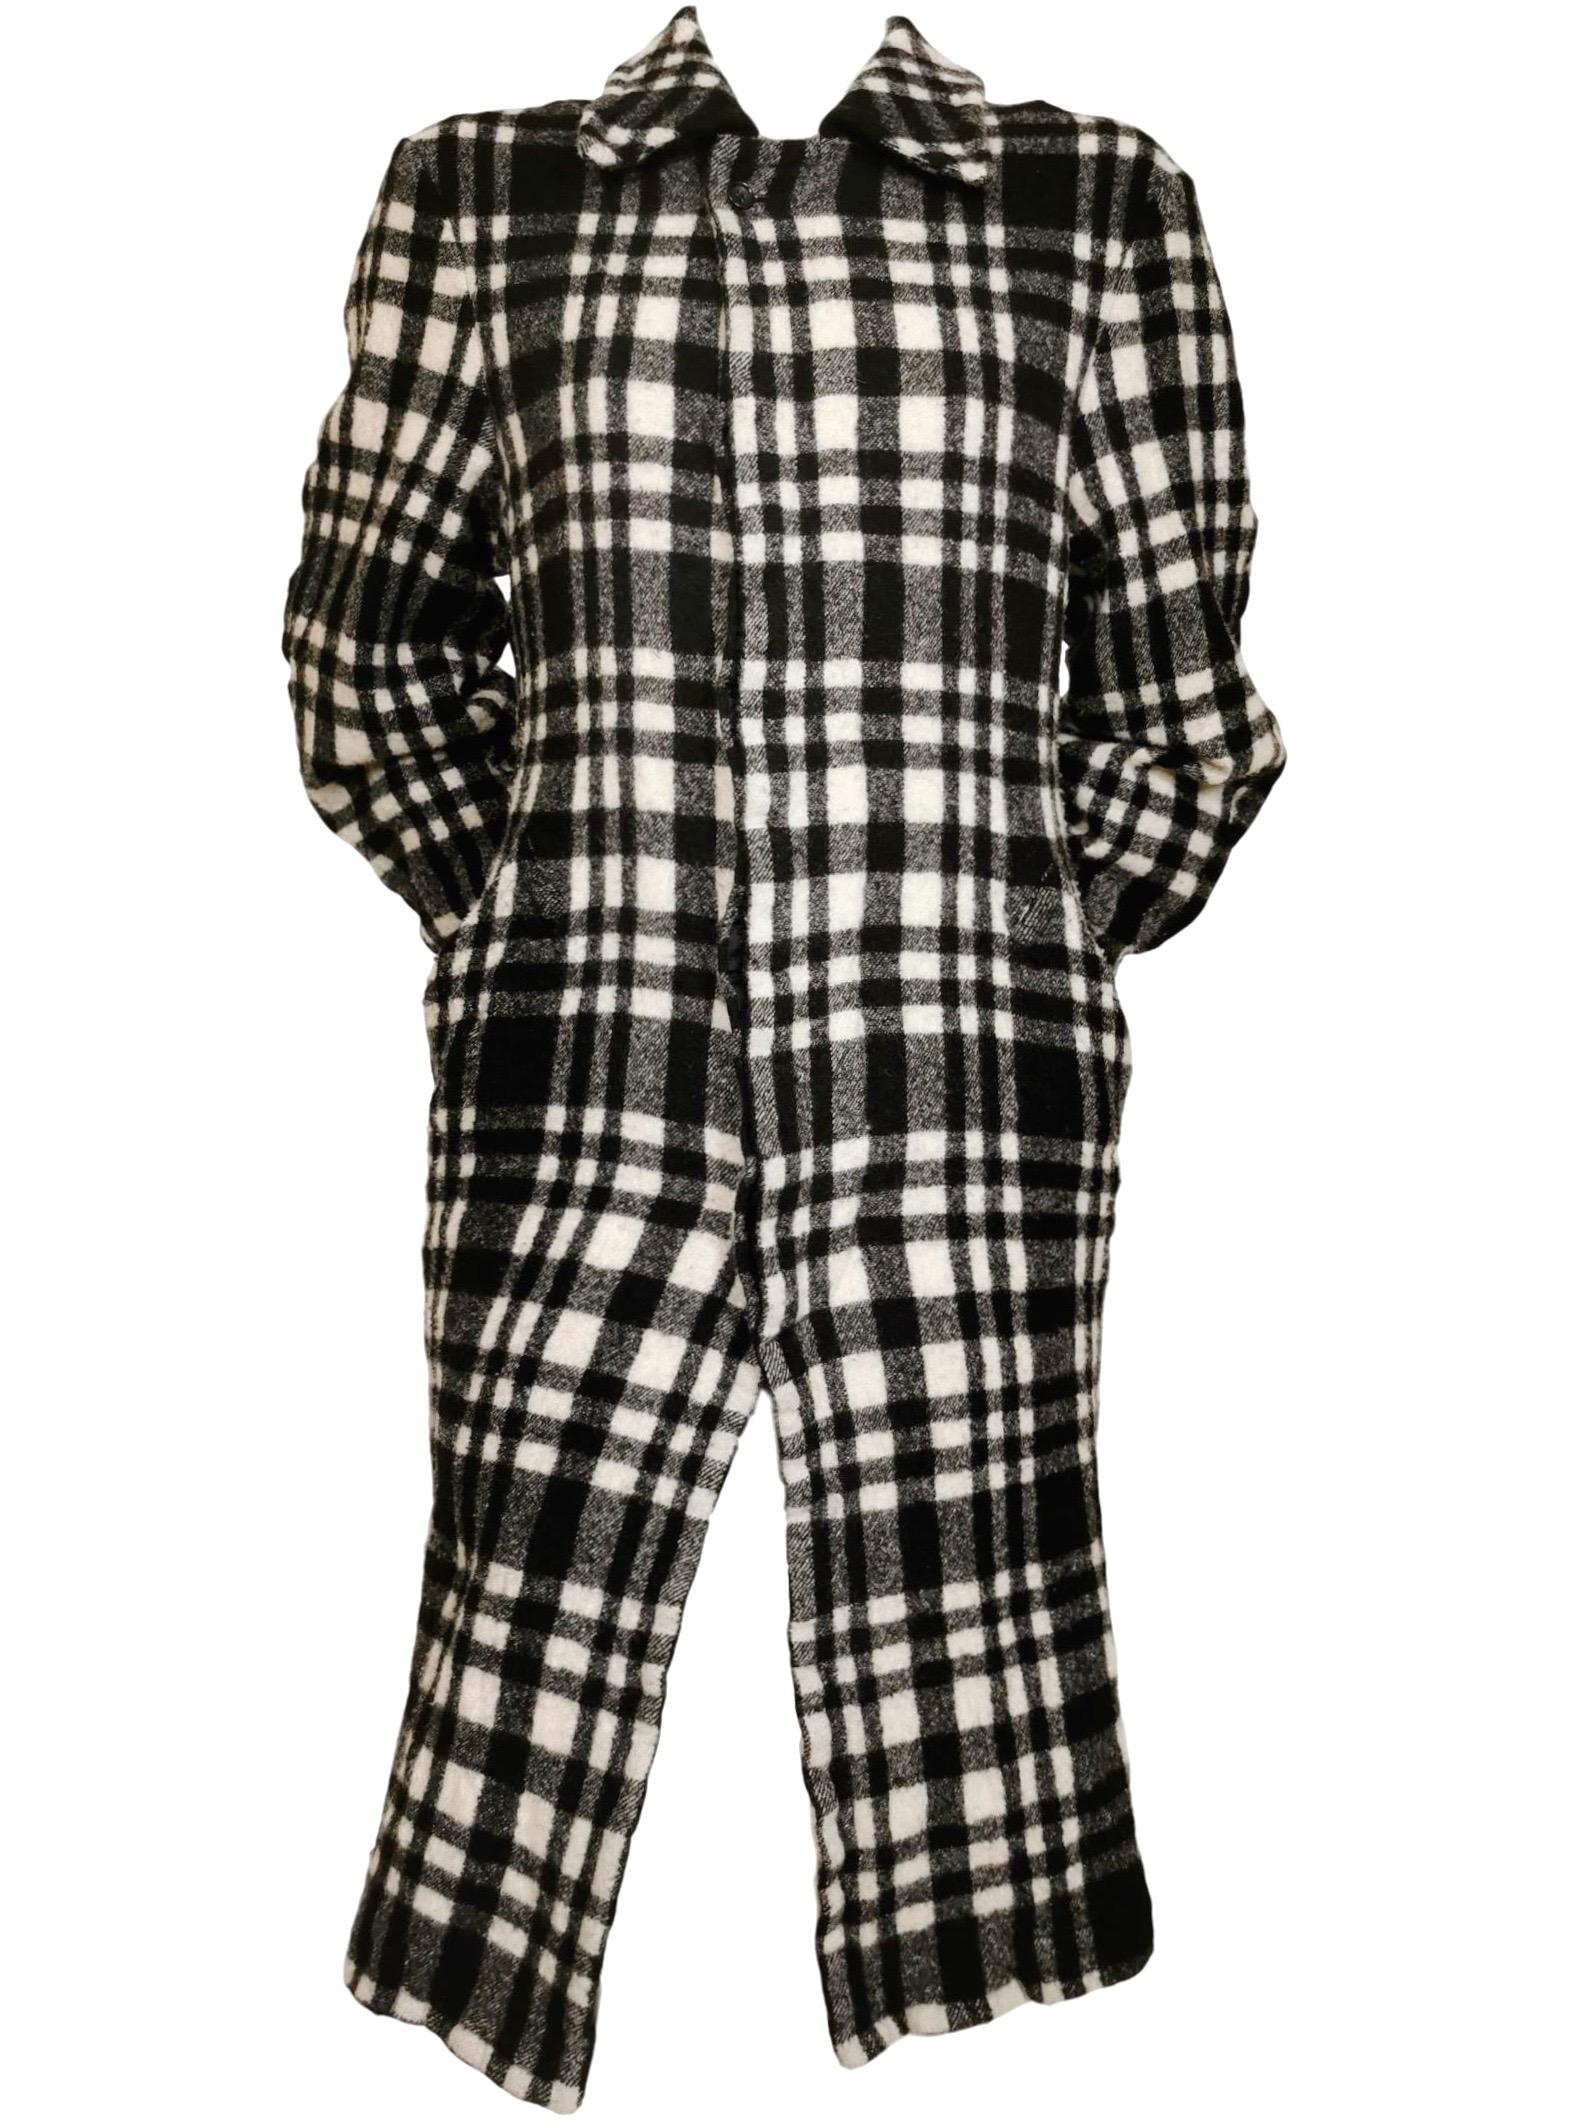 Comme des Garcons Wool Plaid Elasticated Back Coat 2007 In Excellent Condition For Sale In Bath, GB